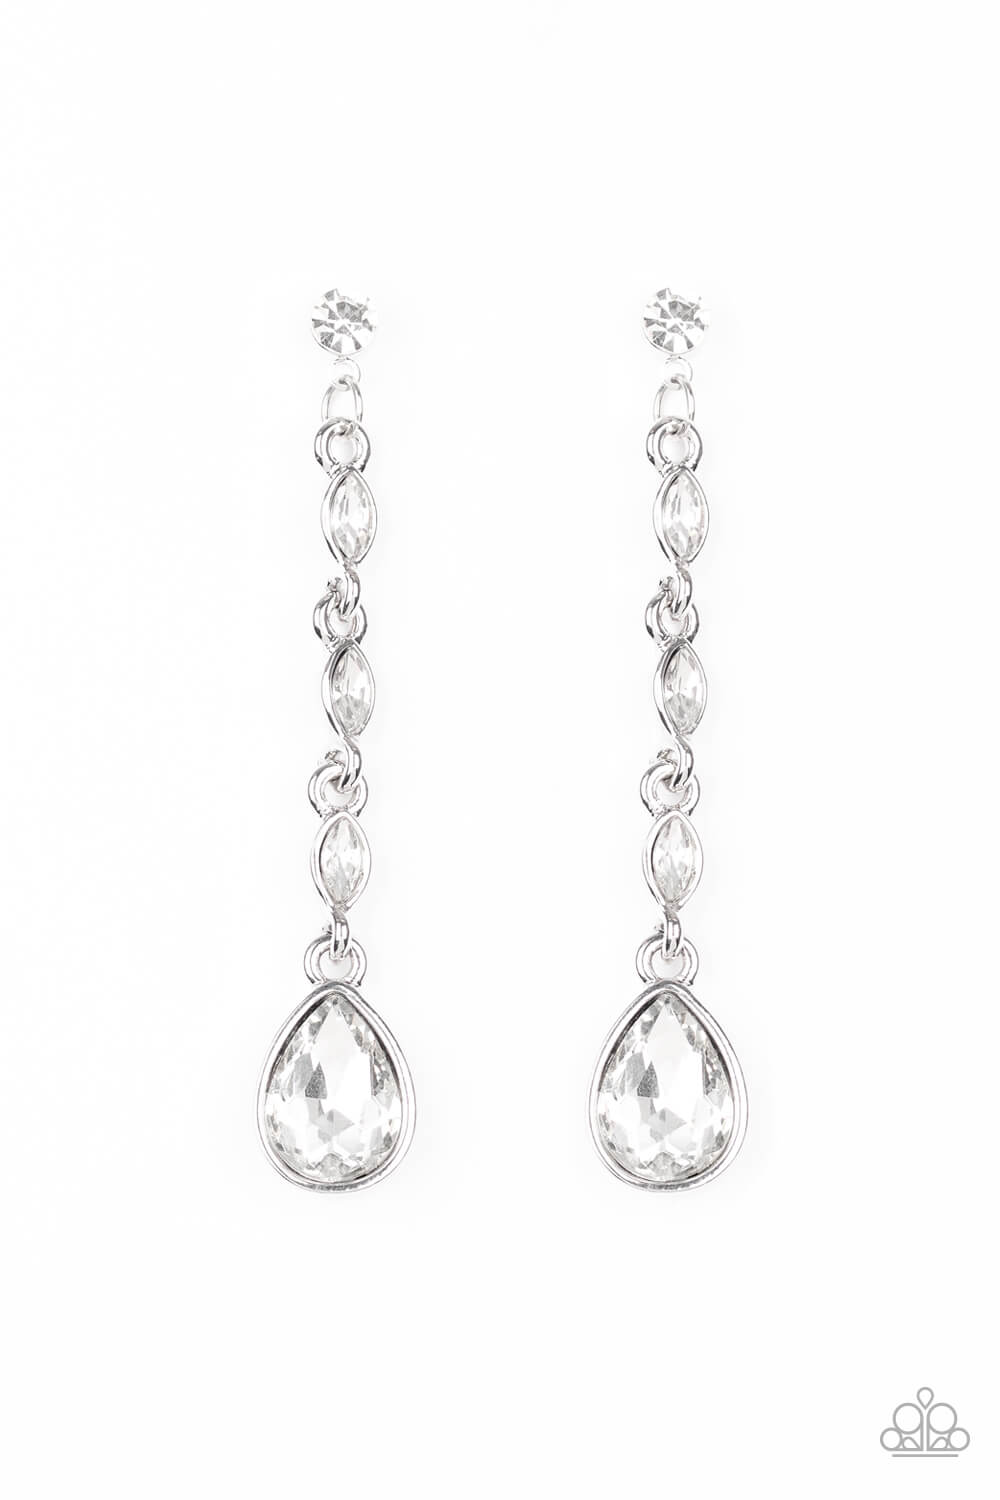 Must Love Diamonds - White Earrings Life of the Party Exclusive - Princess Glam Shop